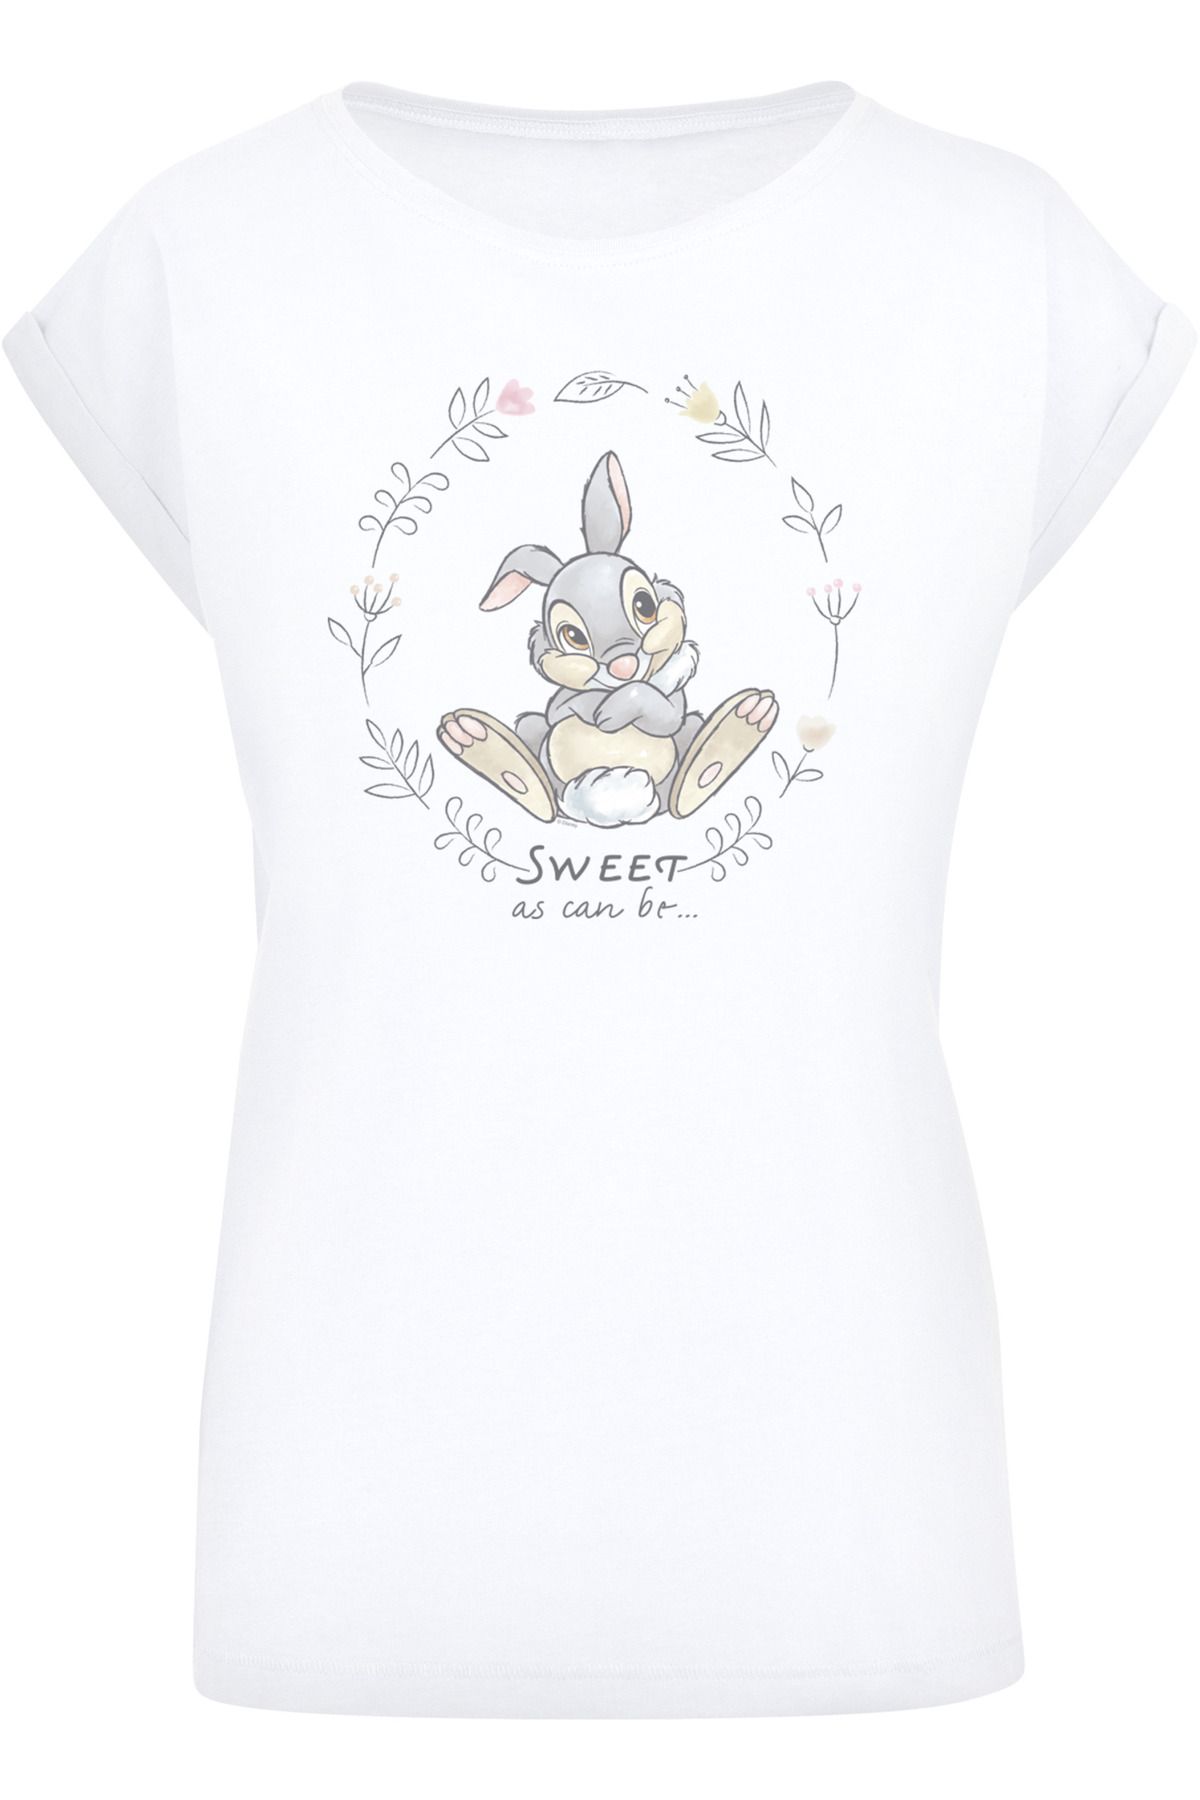 T-Shirt Ladies Shoulder Sweet Disney mit F4NT4STIC Can - Bambi Damen Extended As Be-WHT Trendyol Thumper